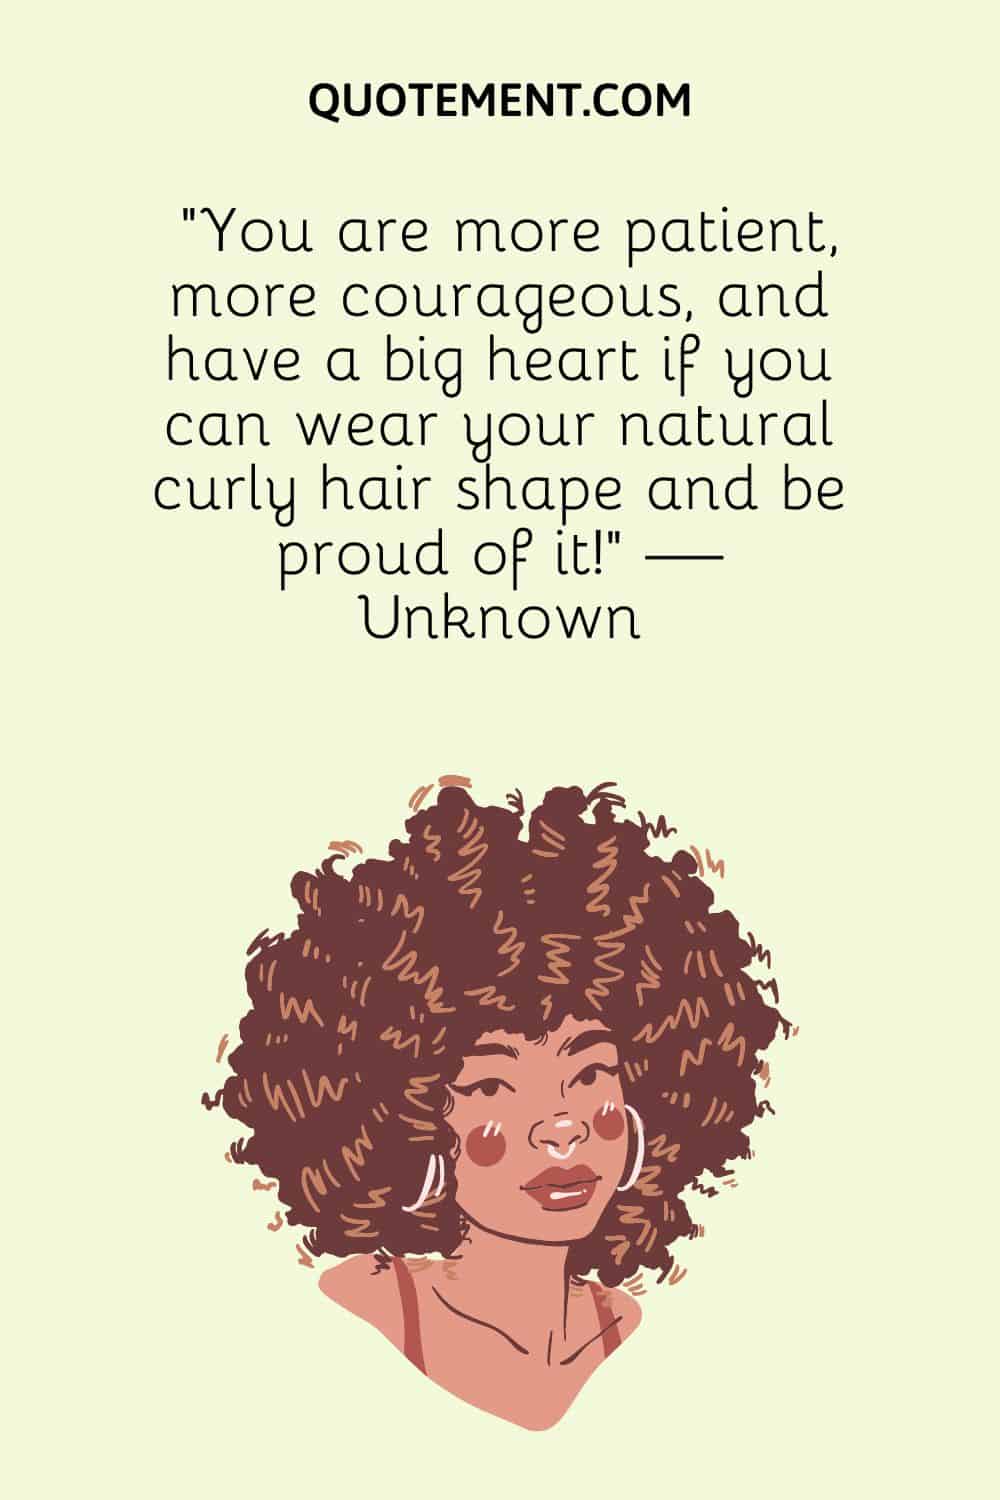 You are more patient, more courageous, and have a big heart if you can wear your natural curly hair shape and be proud of it!